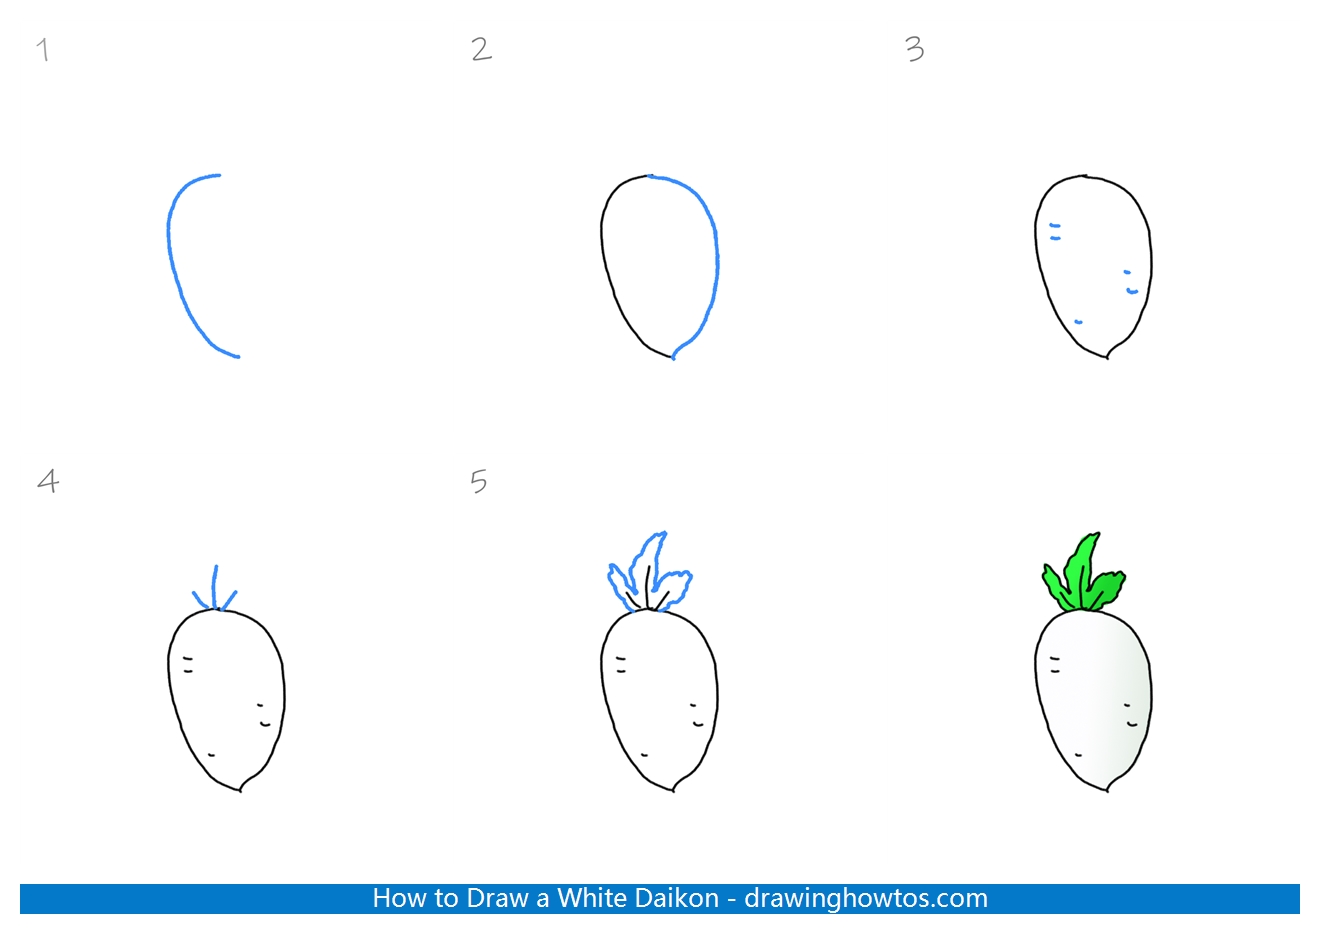 How to Draw a White Daikon Step by Step